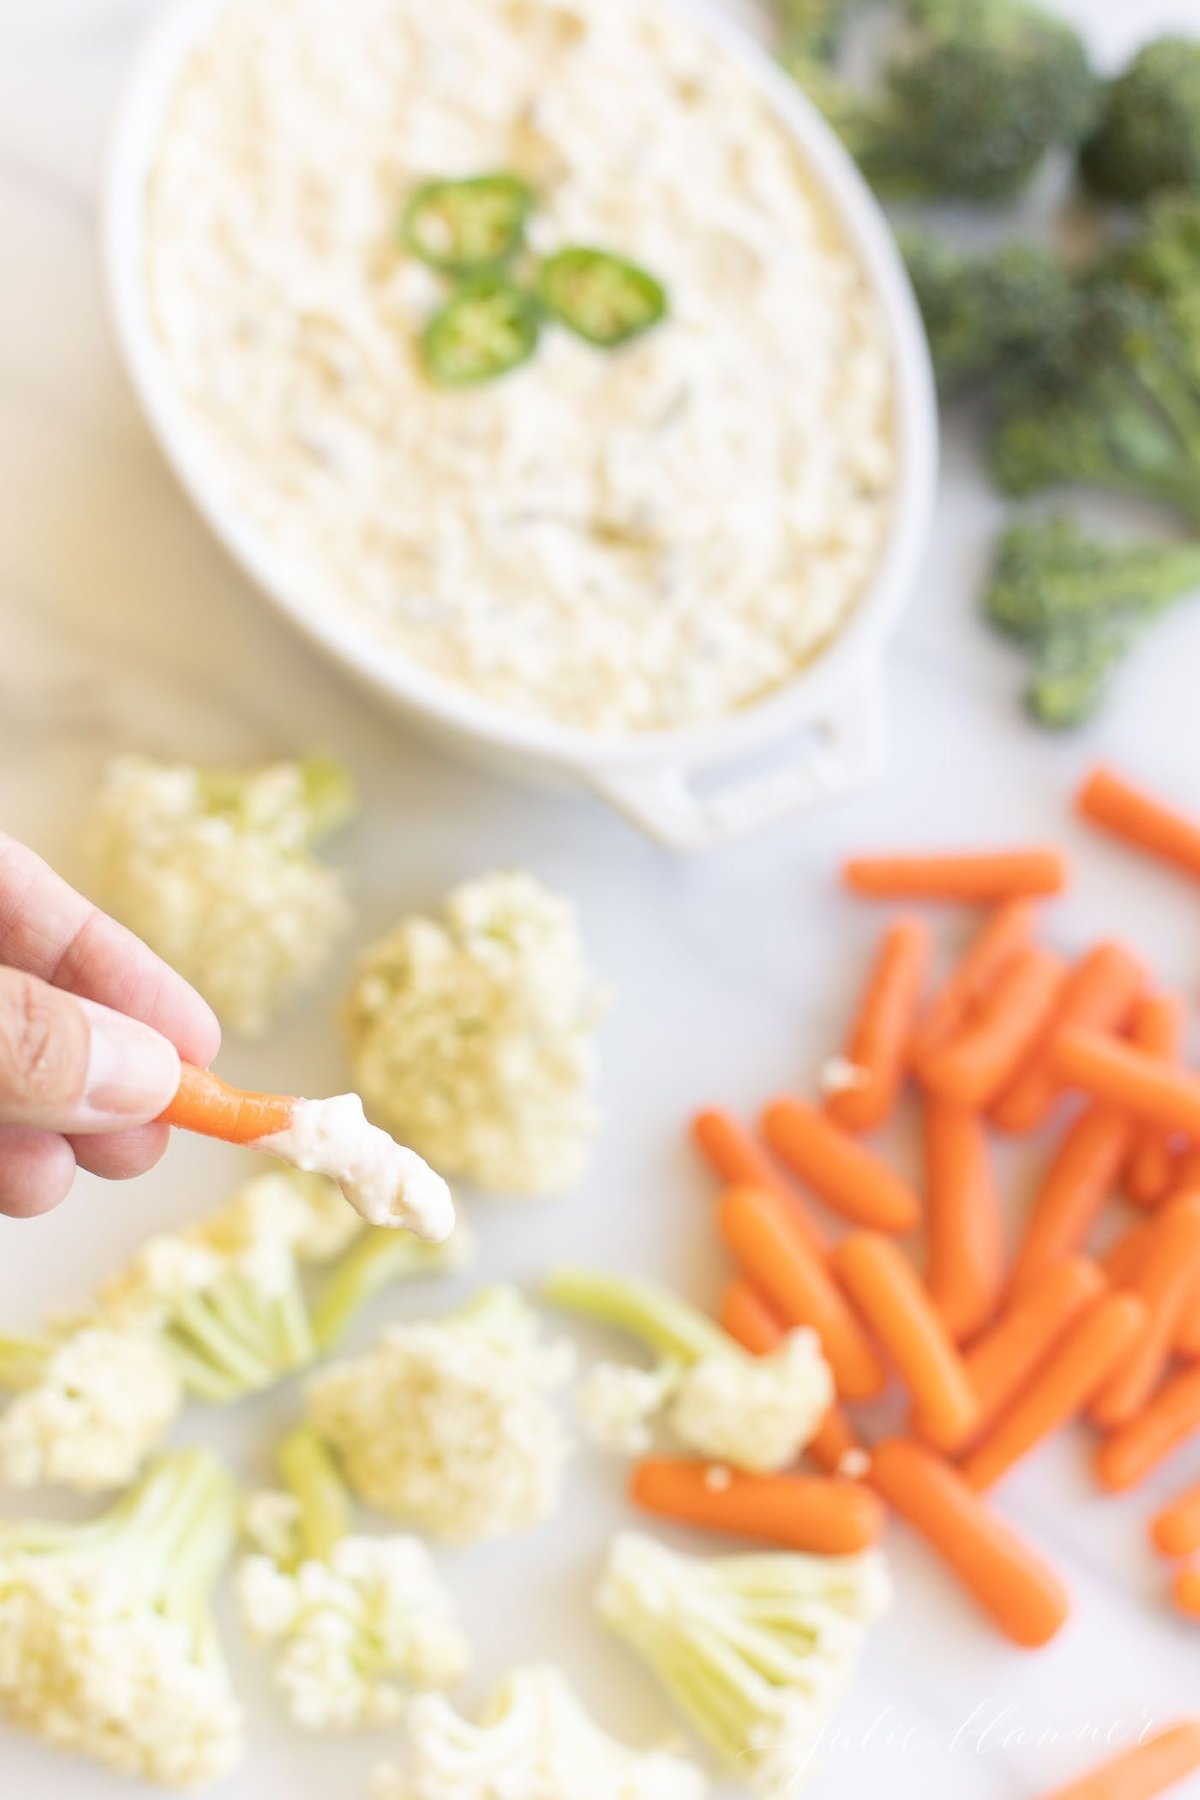 A creamy jalapeno dip surrounded by fresh vegetables for dipping.